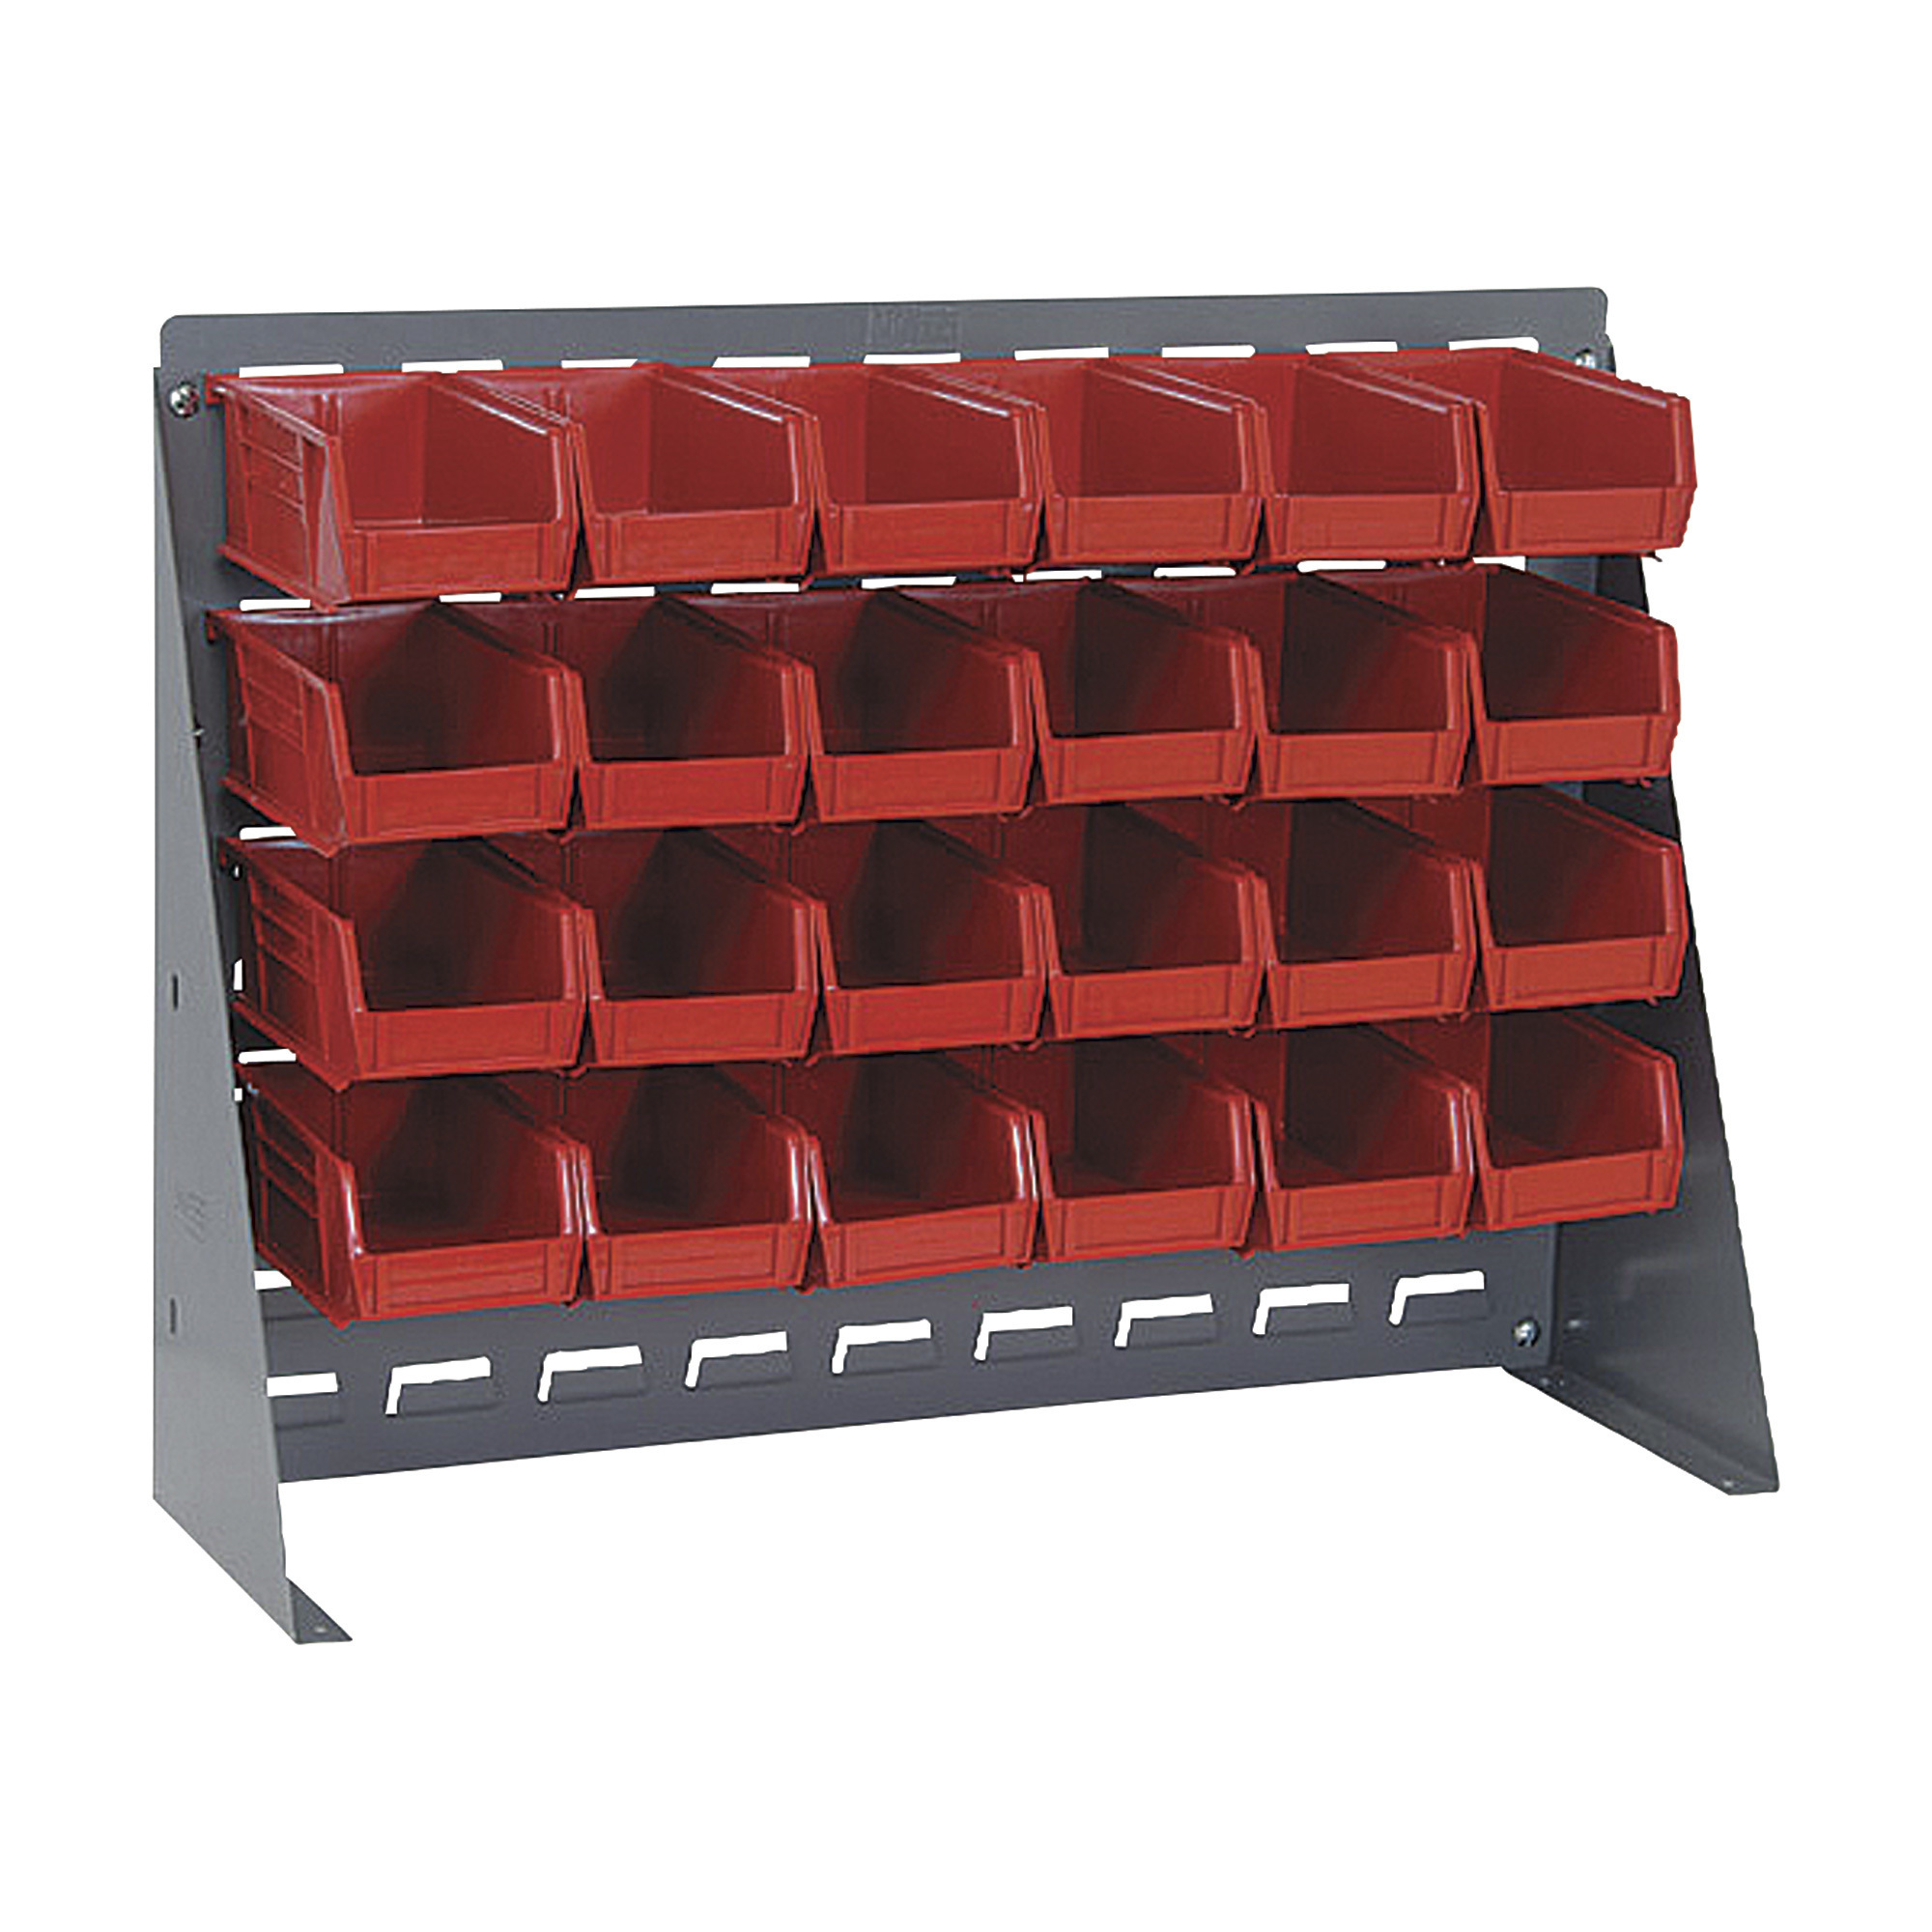 Quantum Storage Louvered Panel Bench Rack with 24 Bins, 27Inch L x 8Inch W x 21Inch H, Red, Model QBR-2721-220-24RD